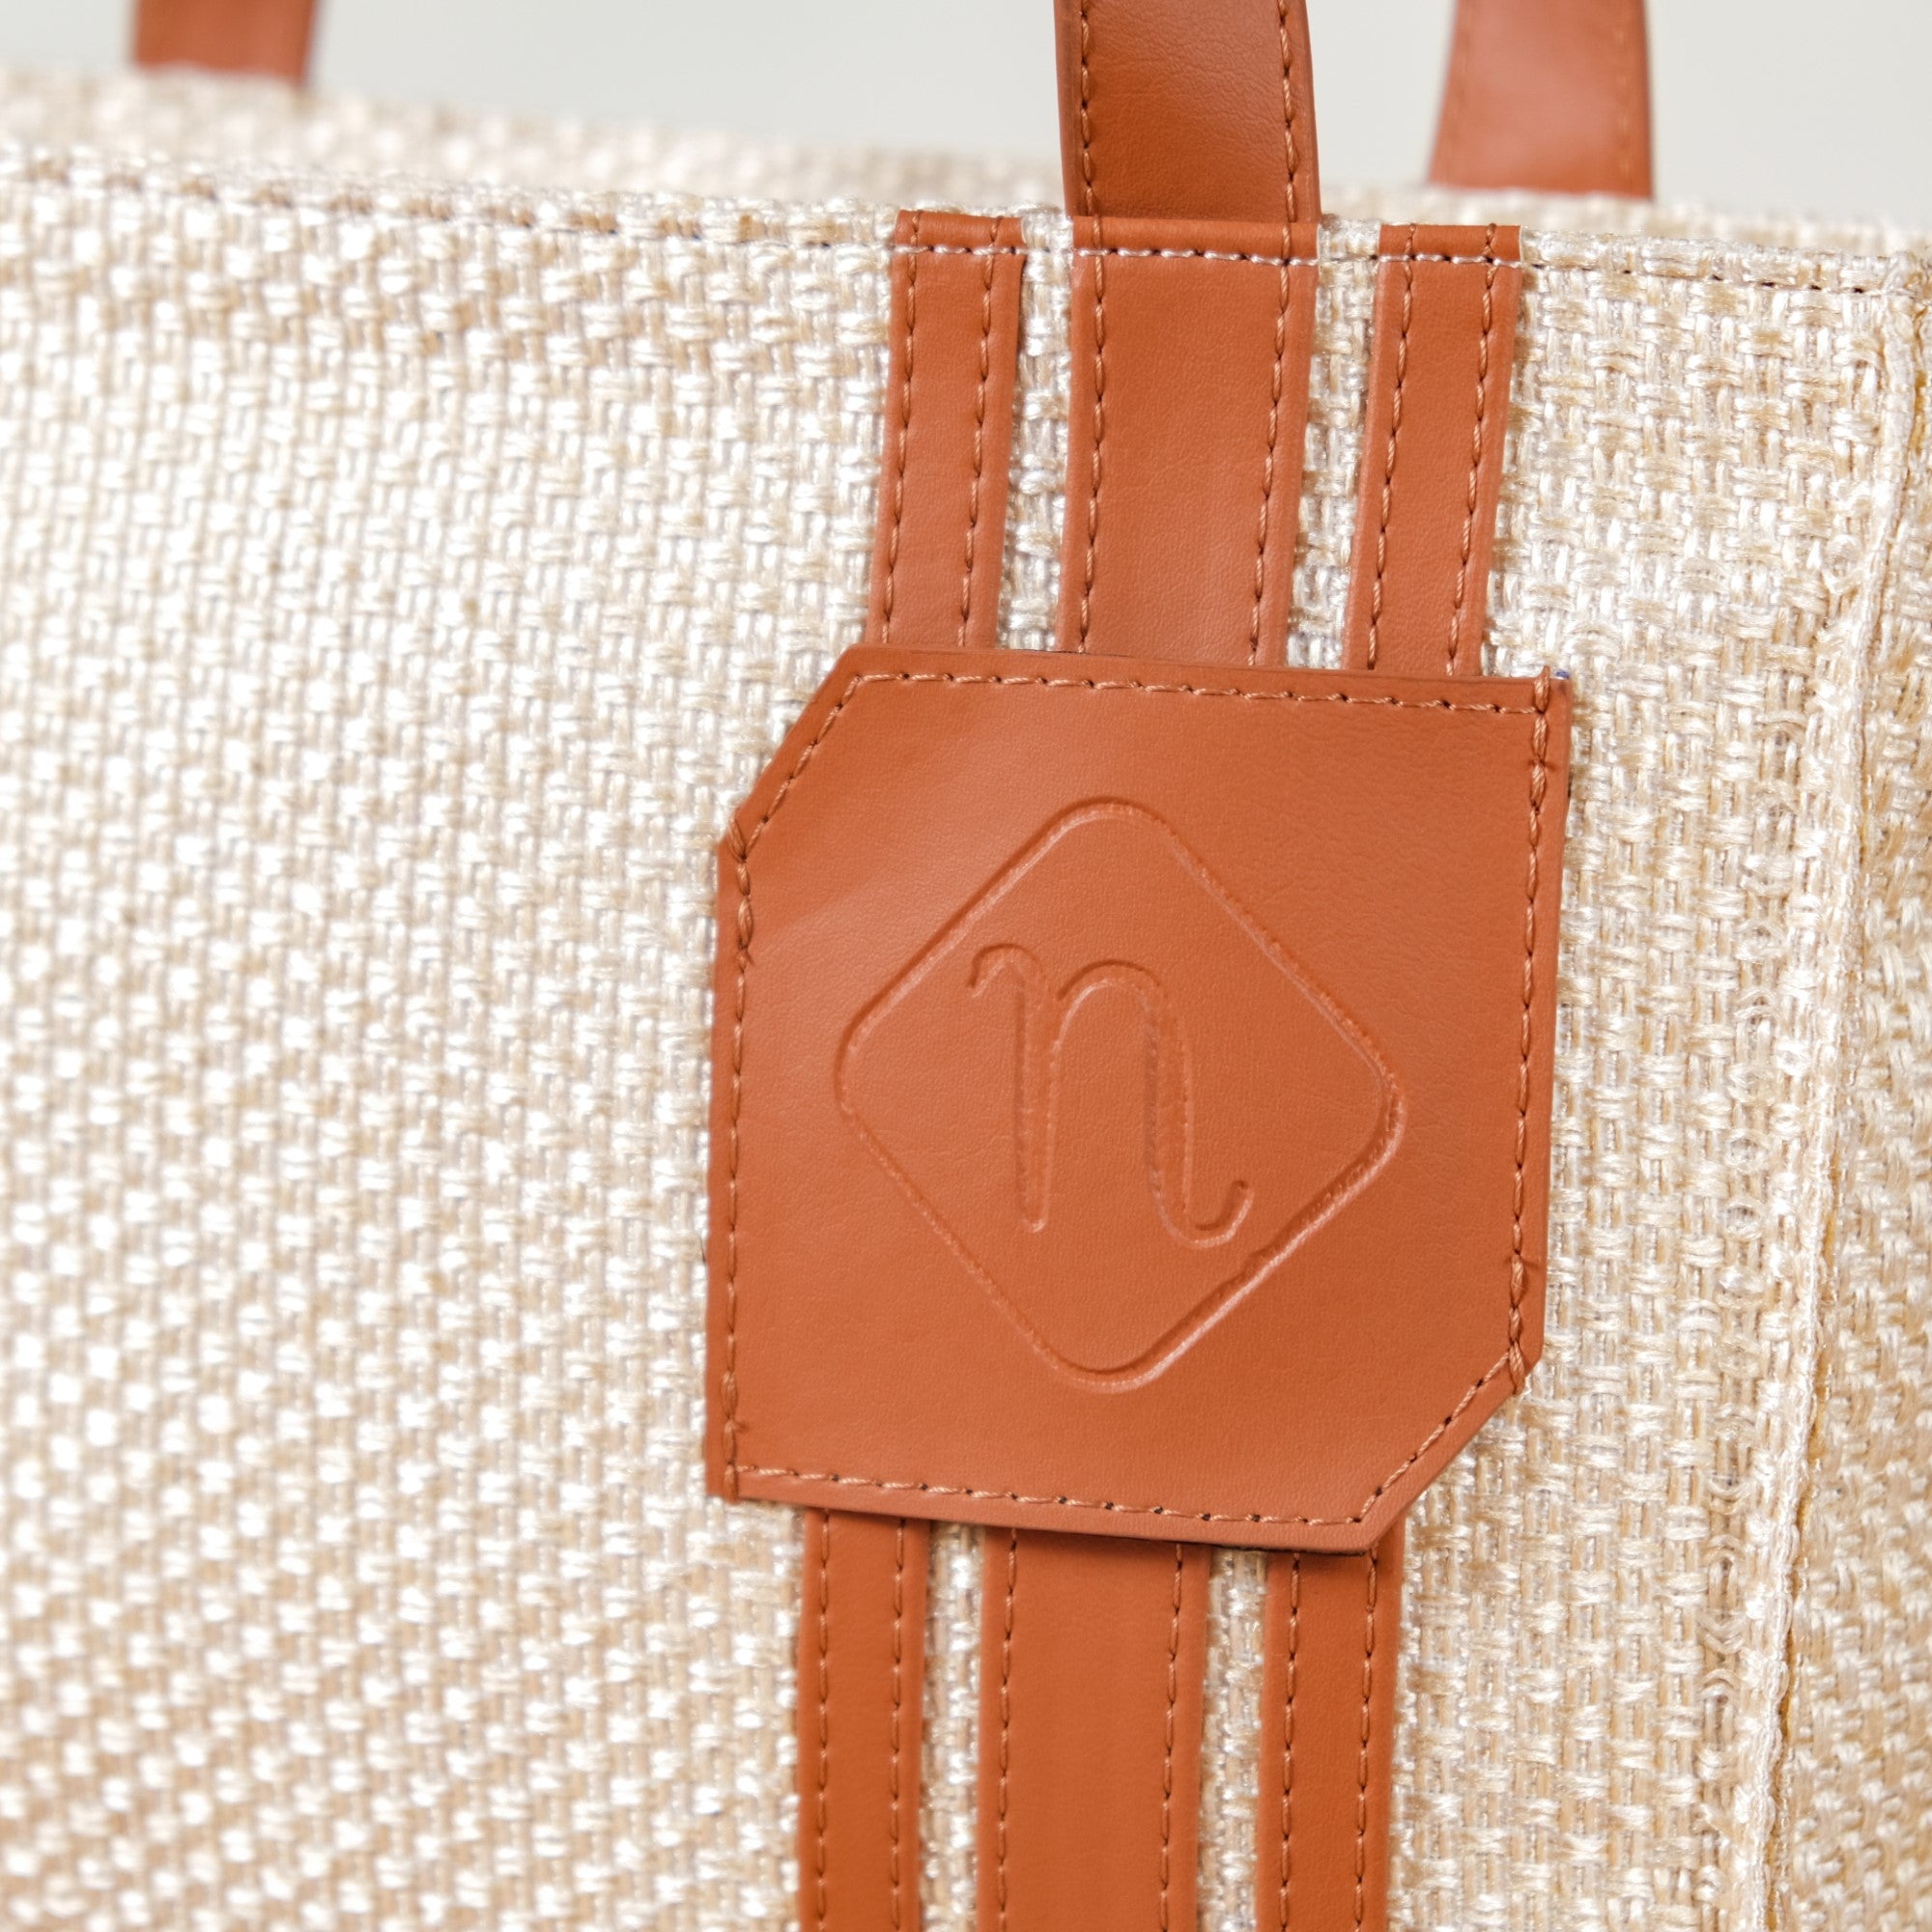 Montana West Tote Bags Vegan Leather Purses and India | Ubuy